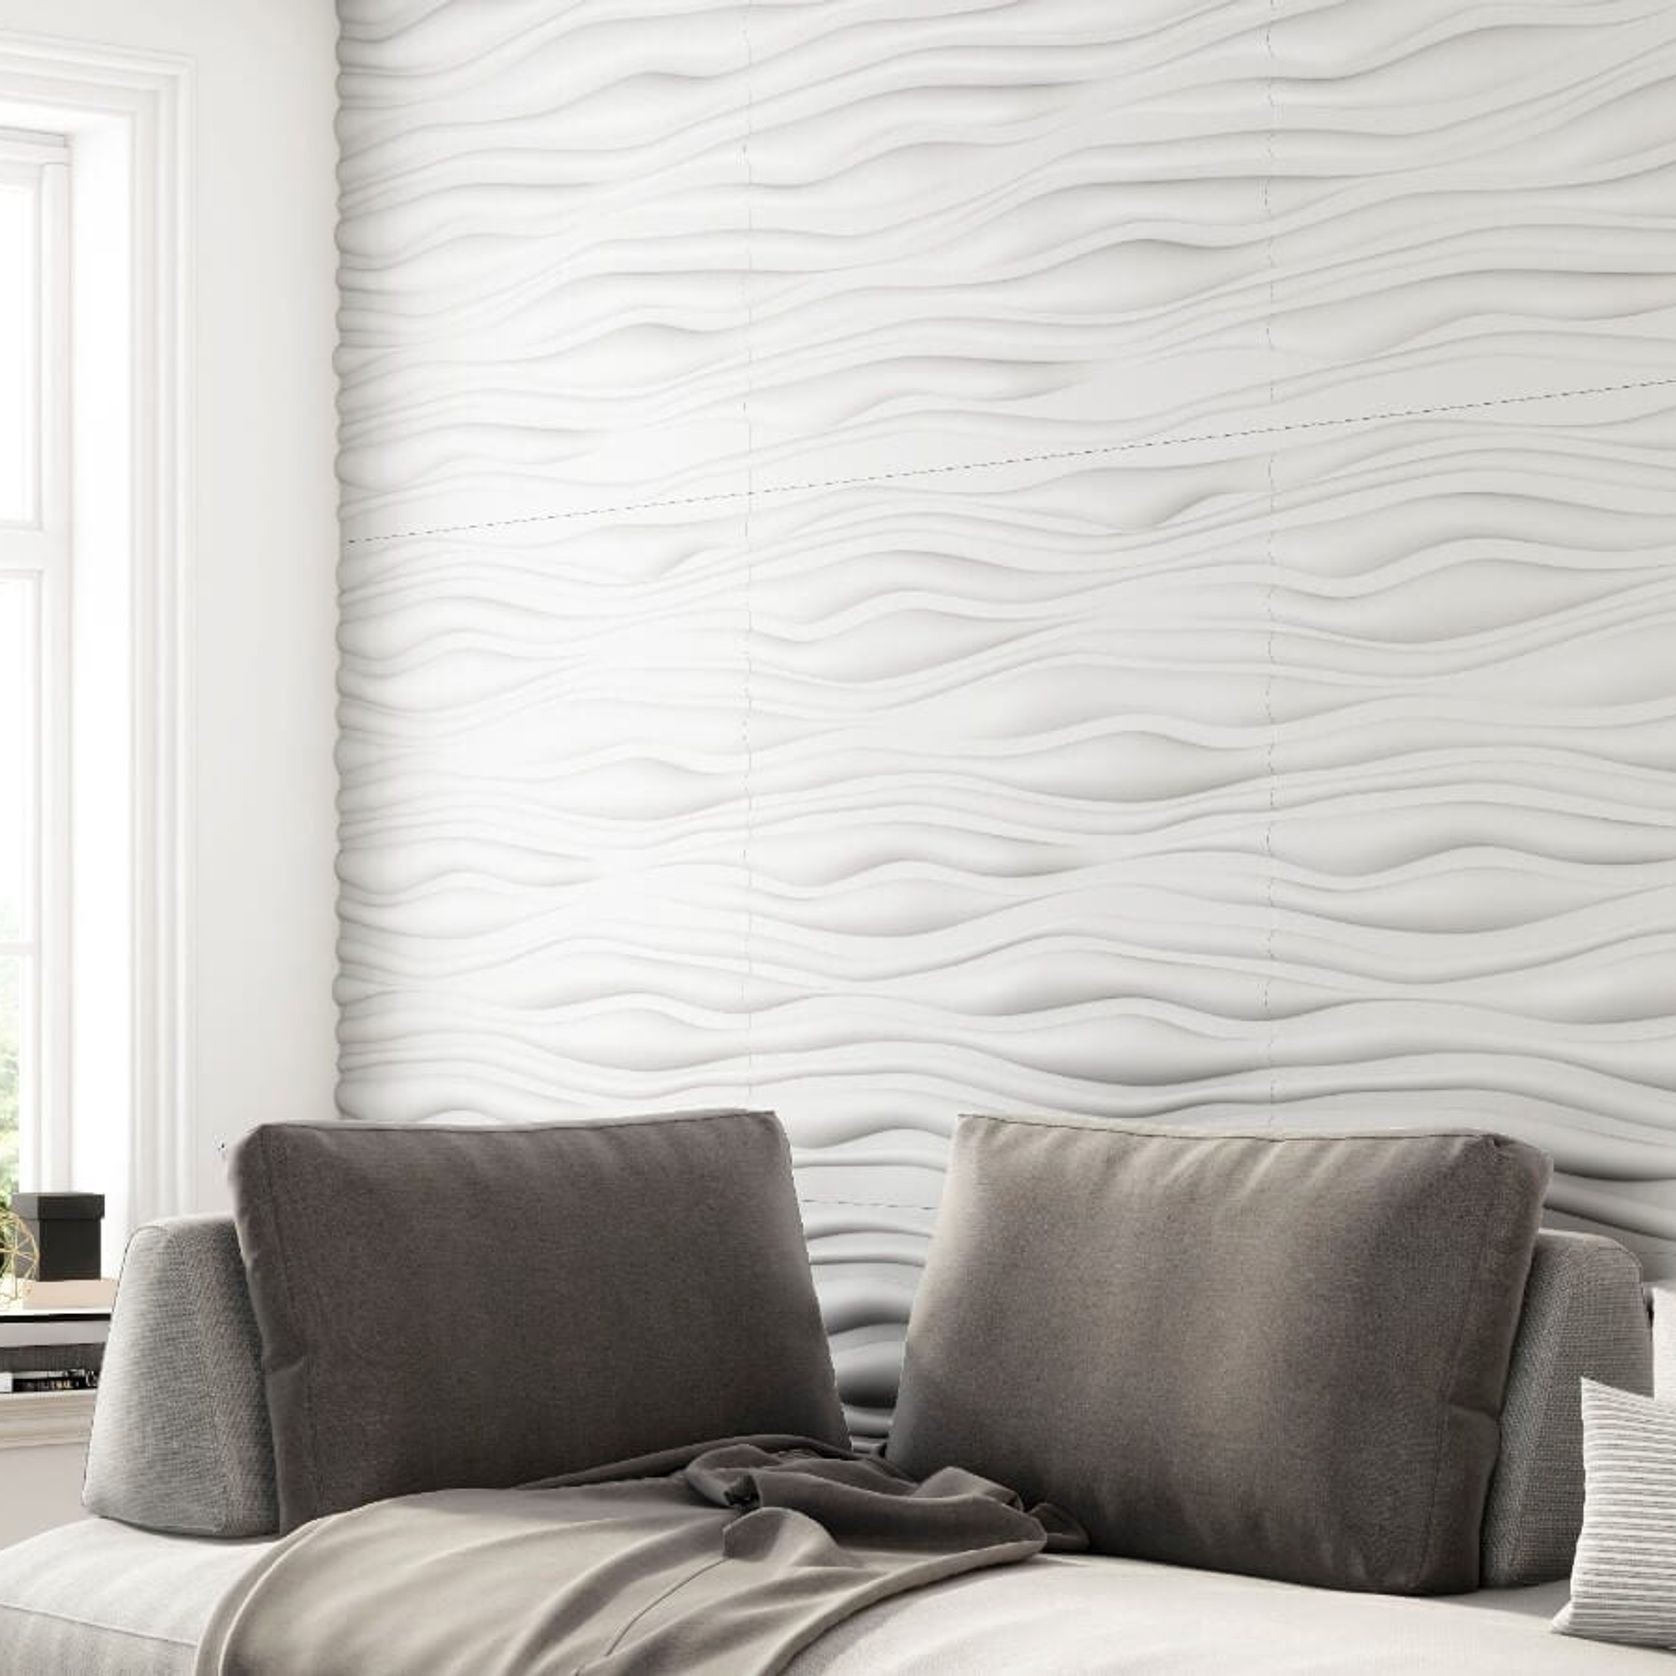 3D Magnolia Modular Wall Tile by Muros gallery detail image